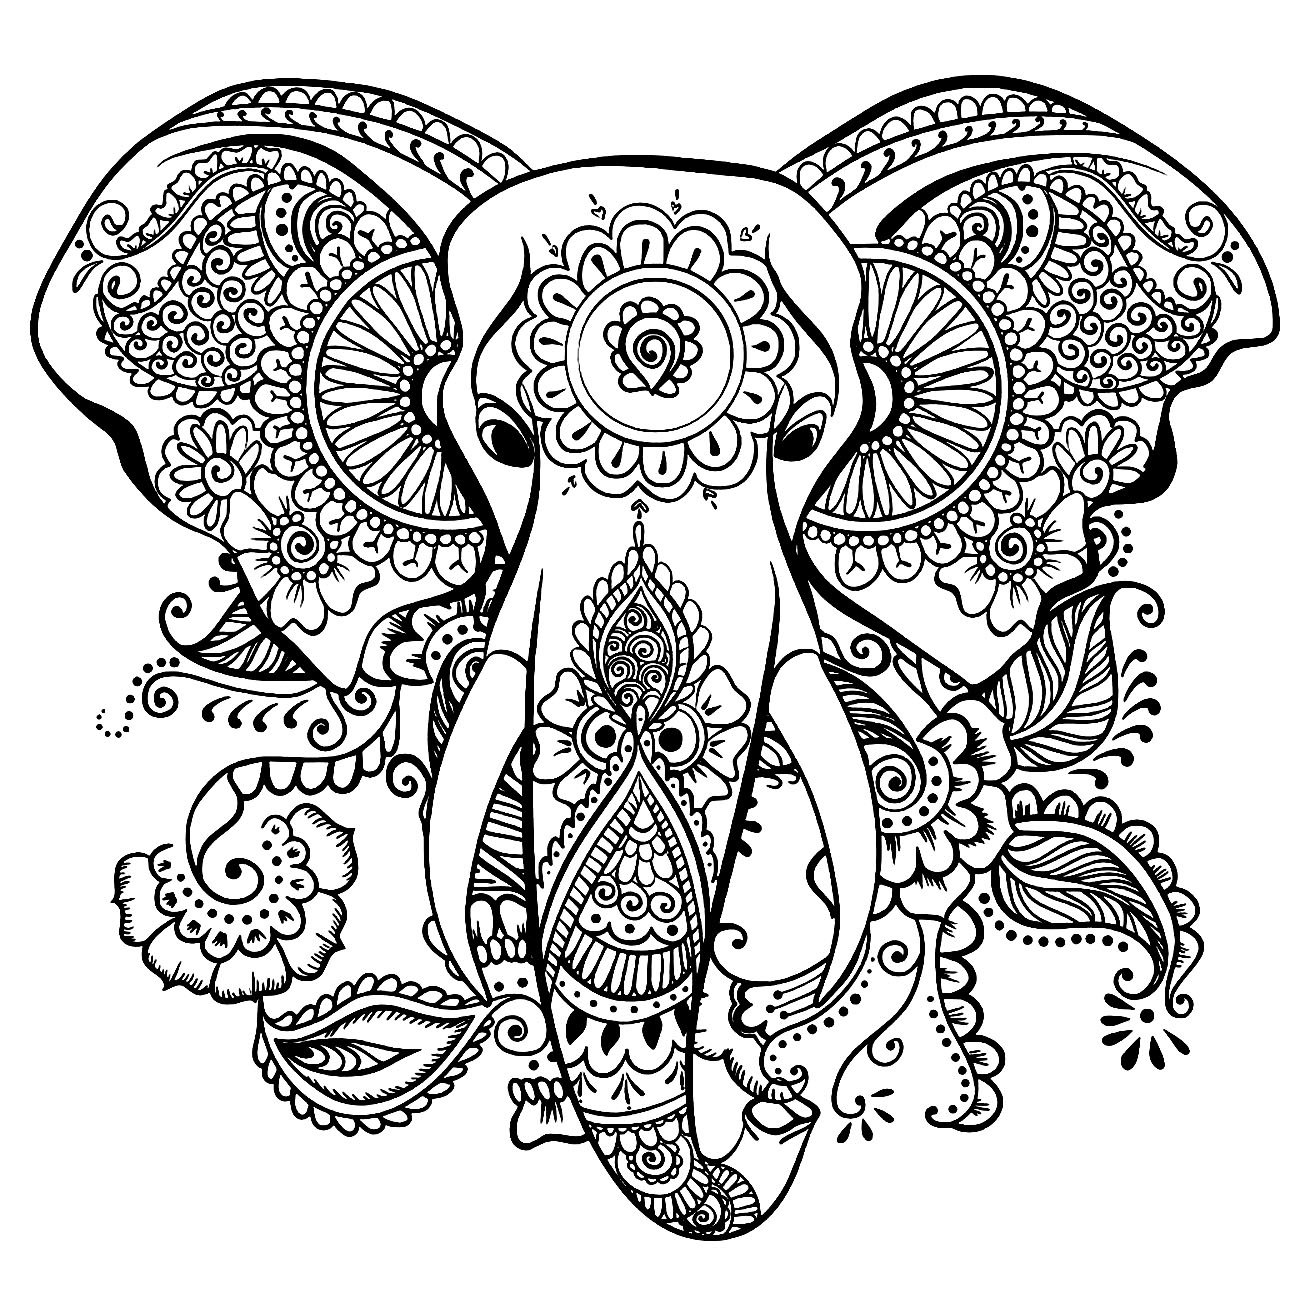 10 Adult-themed Elephant Coloring Pages. - Etsy